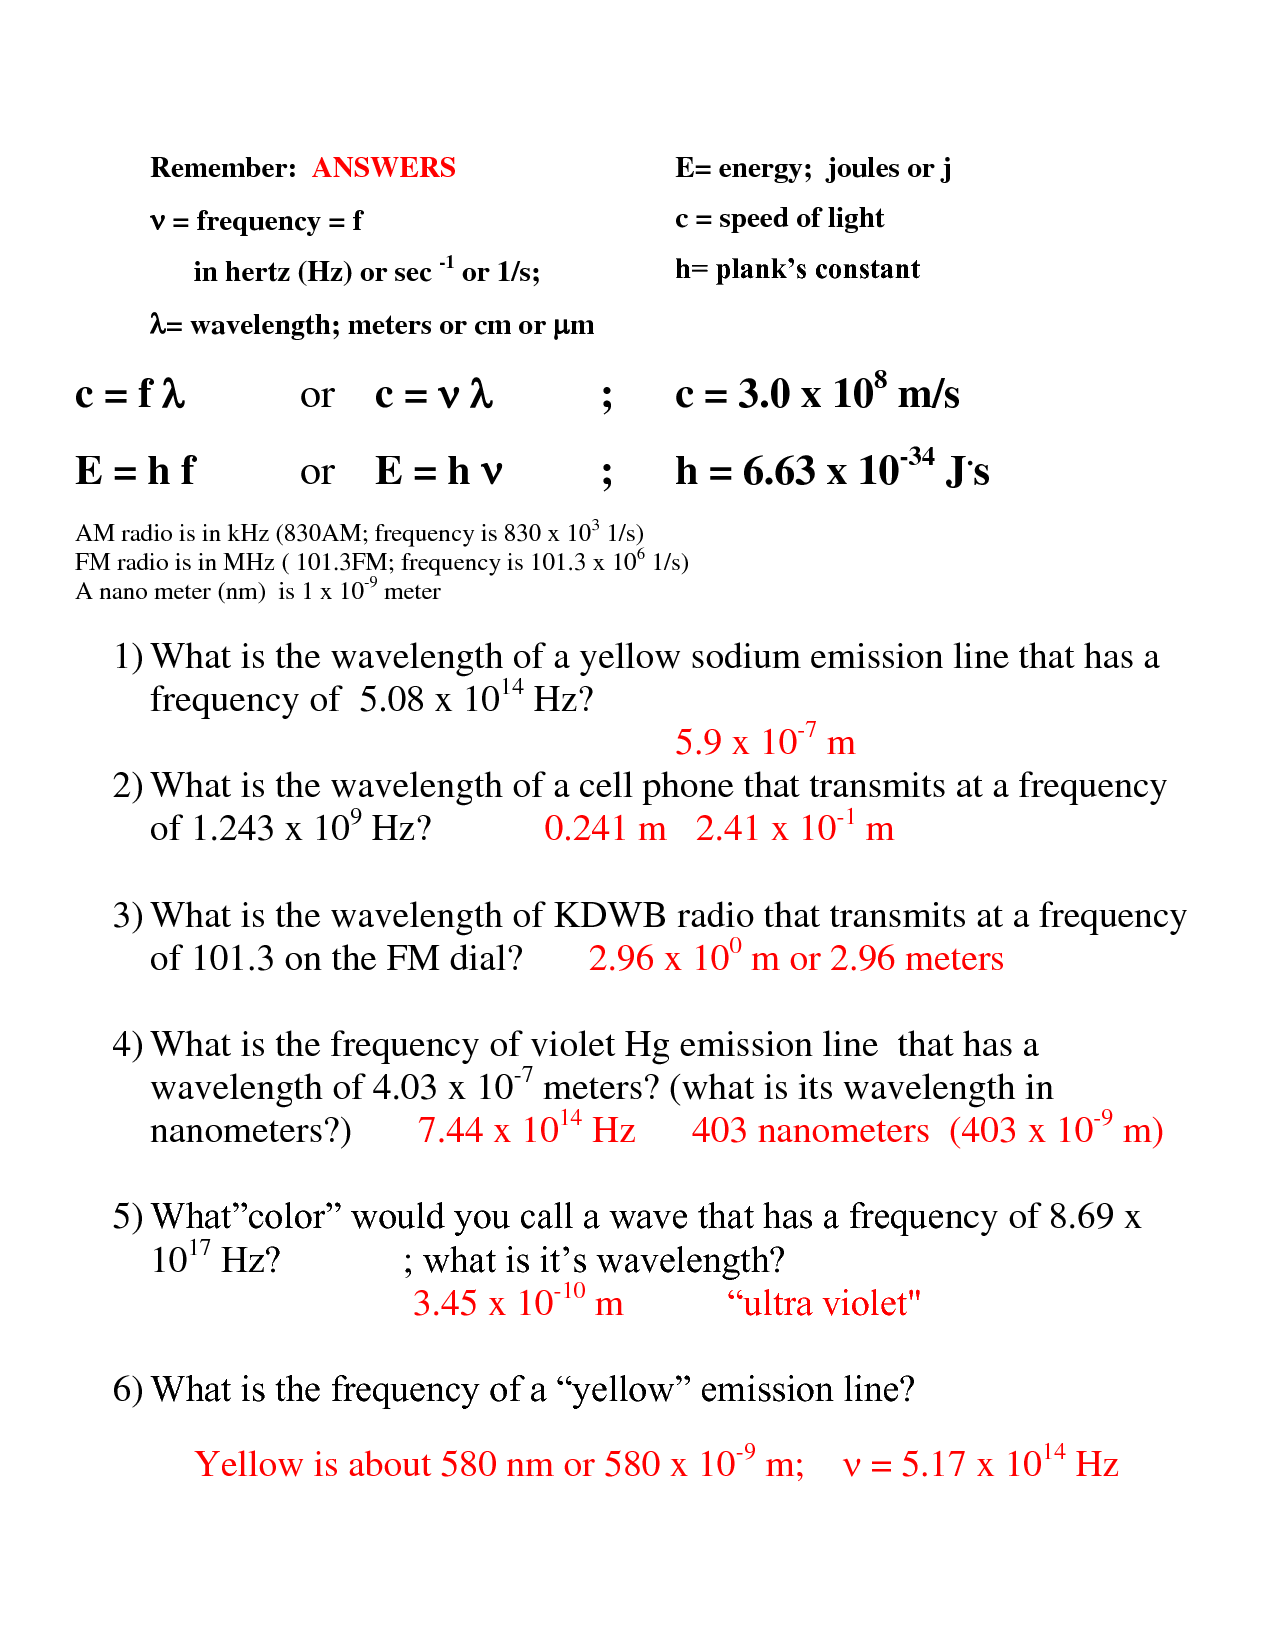 16-best-images-of-wavelength-problems-and-answers-worksheet-speed-frequency-wavelength